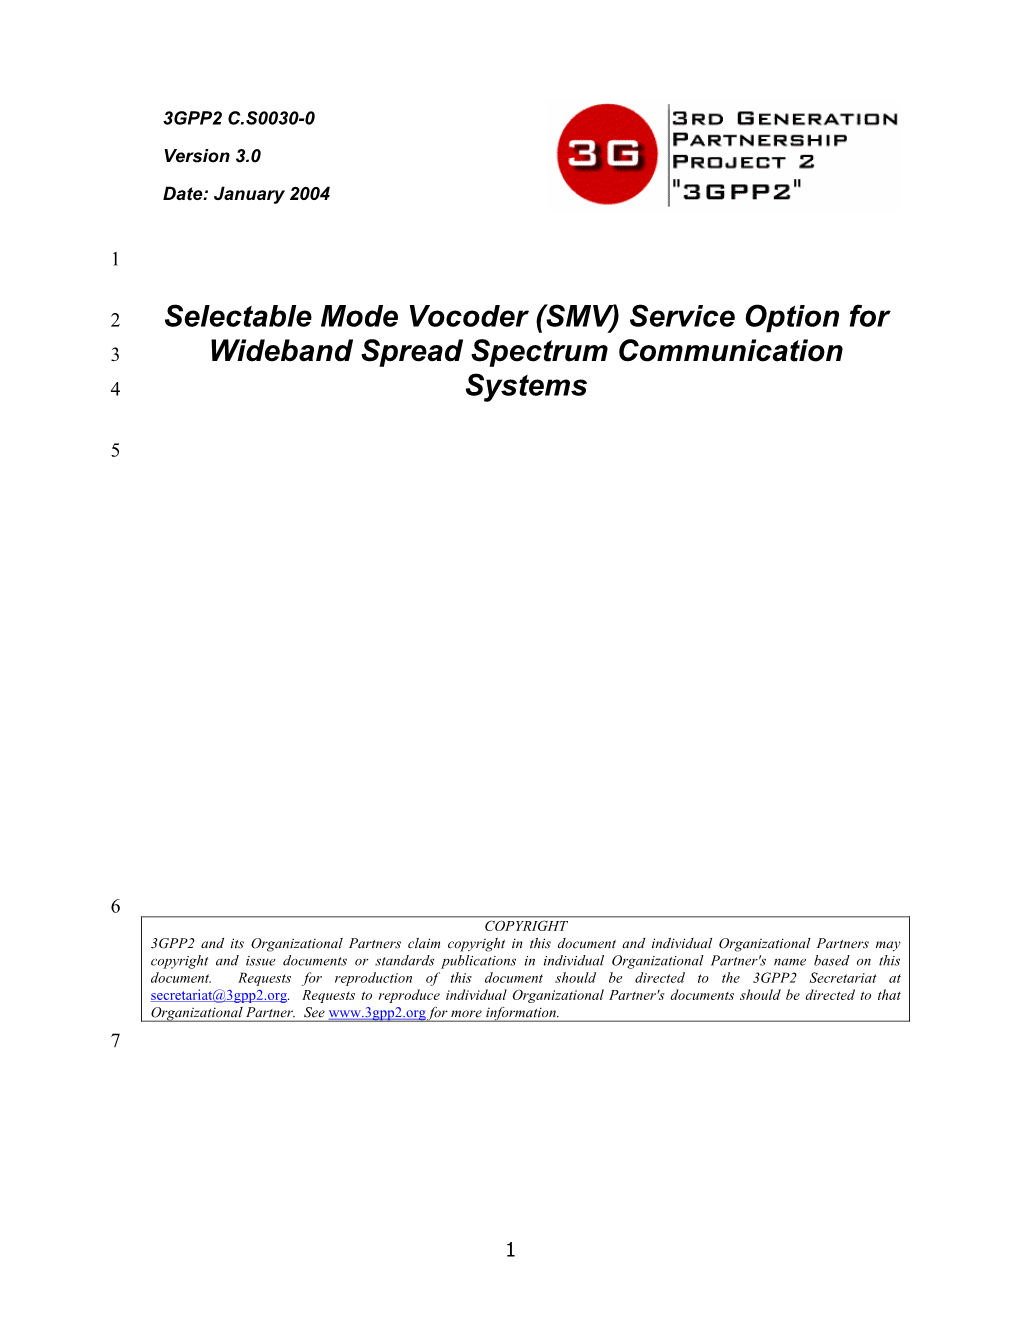 Selectable Mode Vocoder (SMV) Service Option for Wideband Spread Spectrum Communication Systems